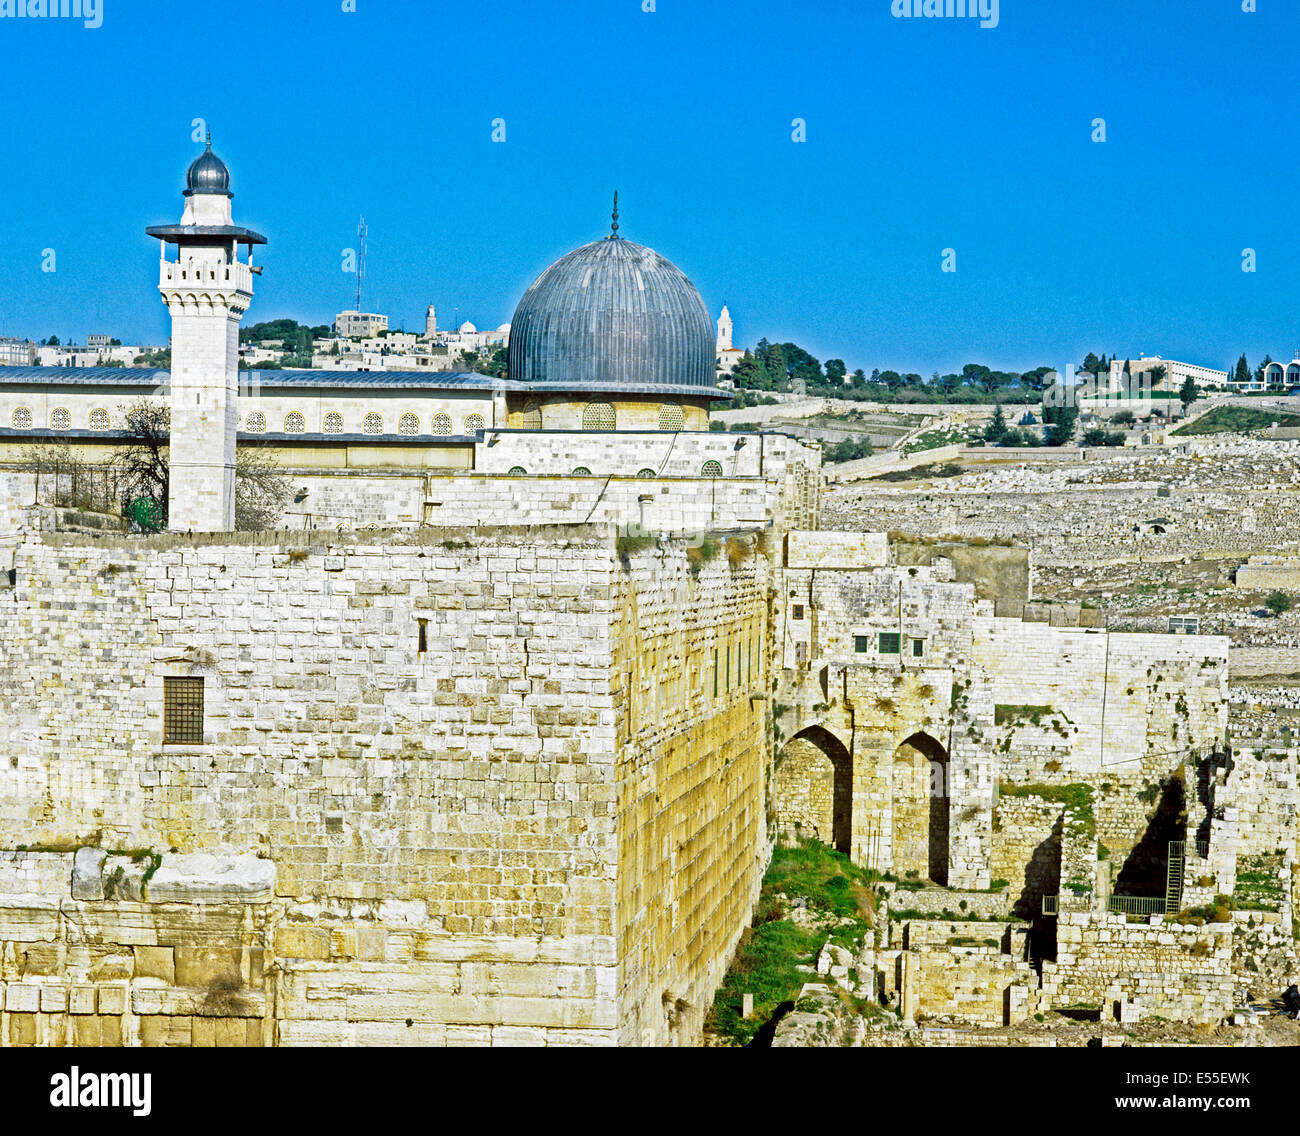 View of the Al-Aqsa Mosque located in the Old City of Jerusalem, Israel Stock Photo